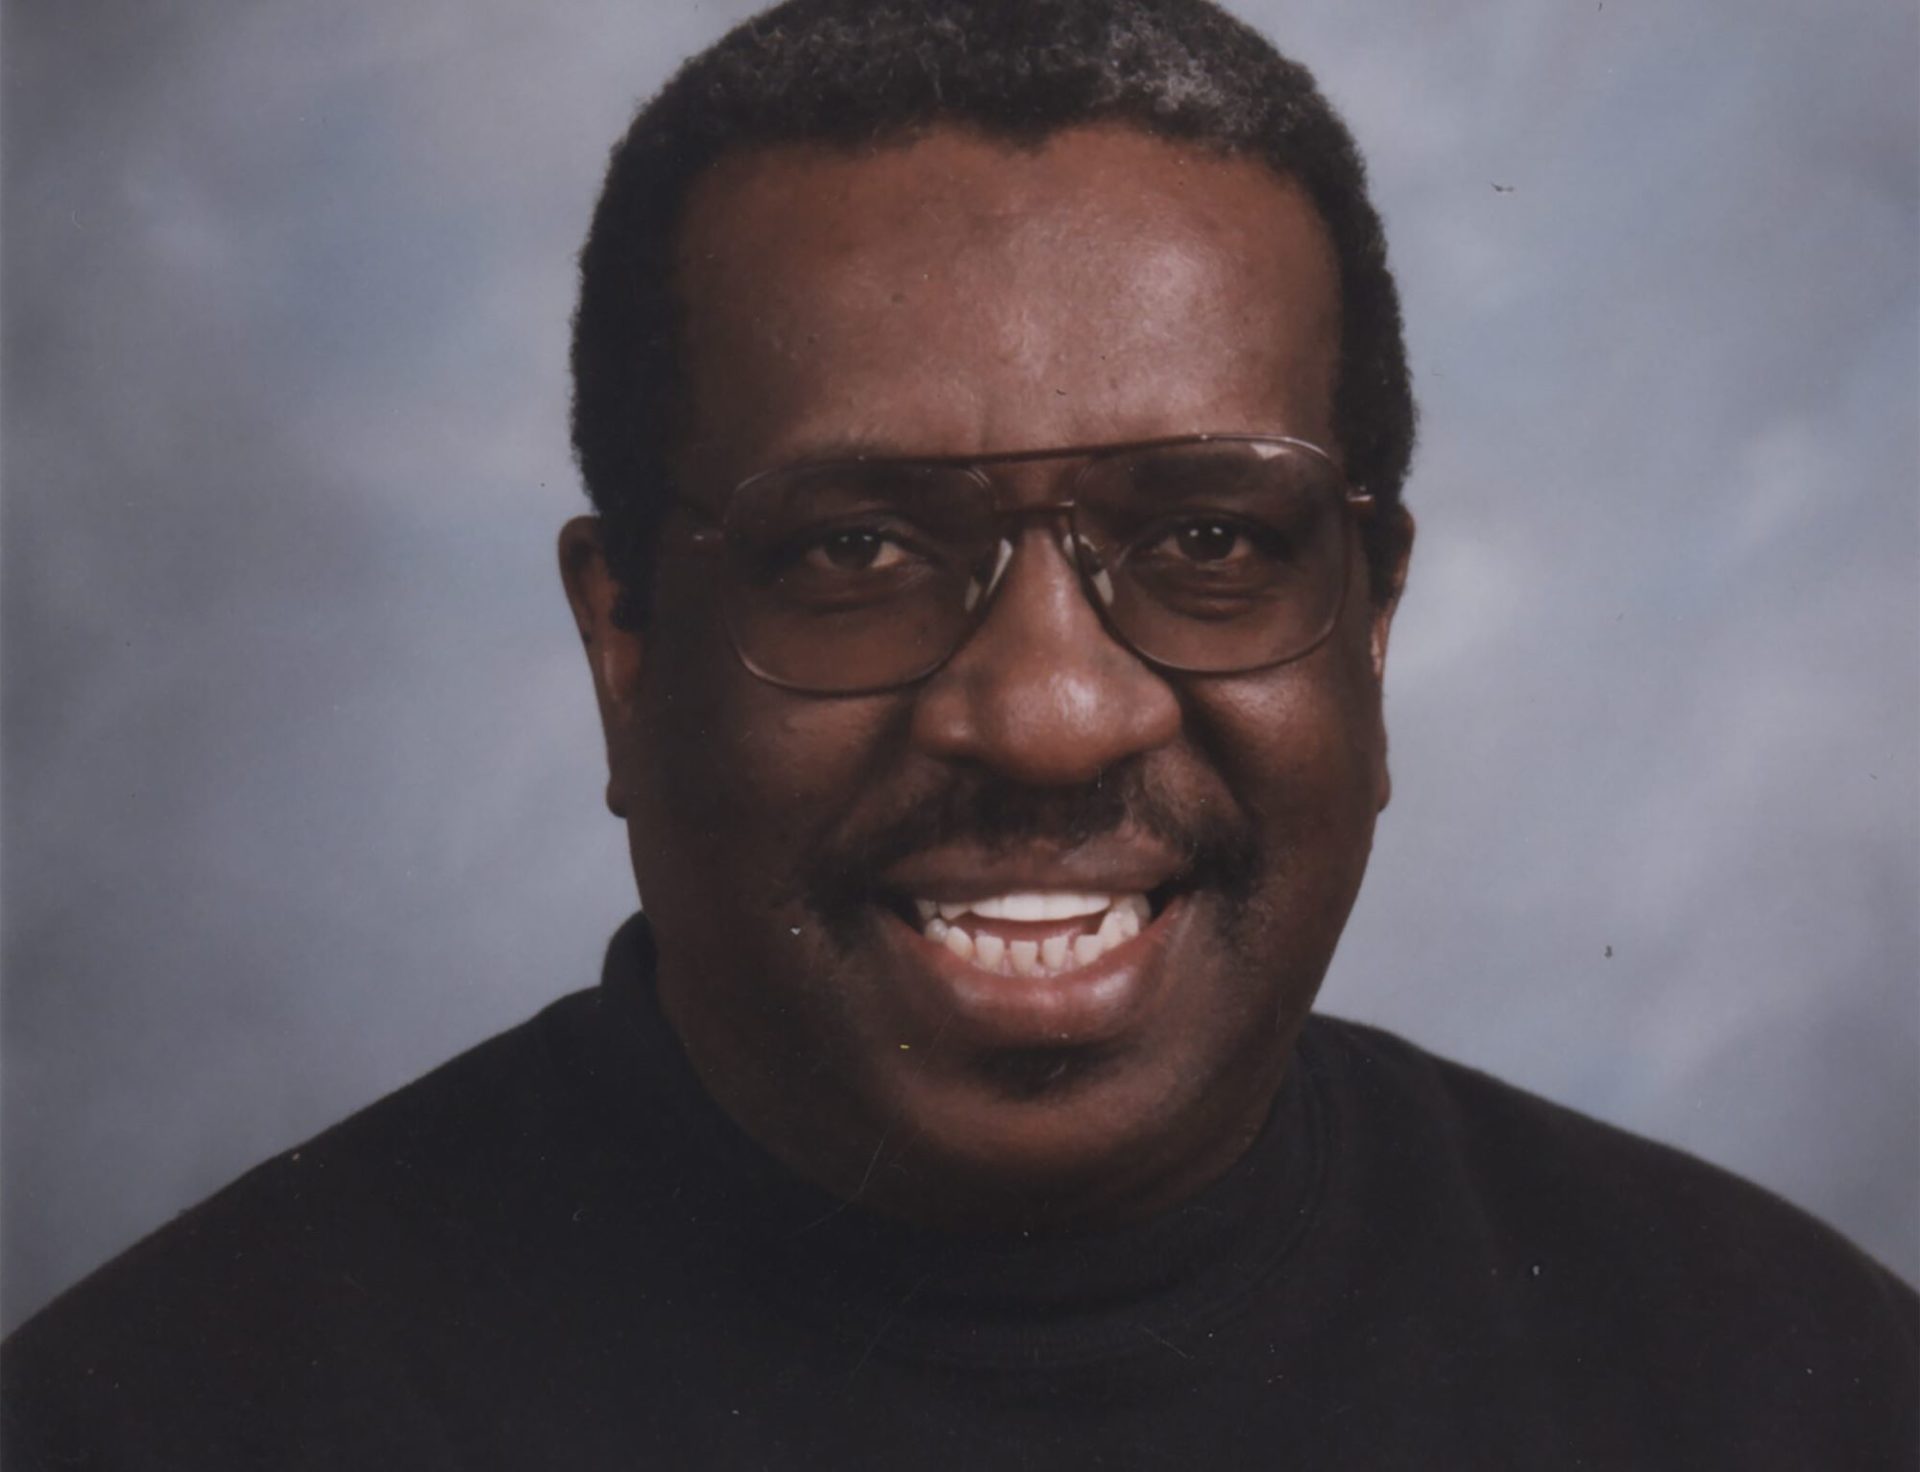 Headshot of a Black man with glasses and a black shirt. He is smiling, and has short hair and a mustache.